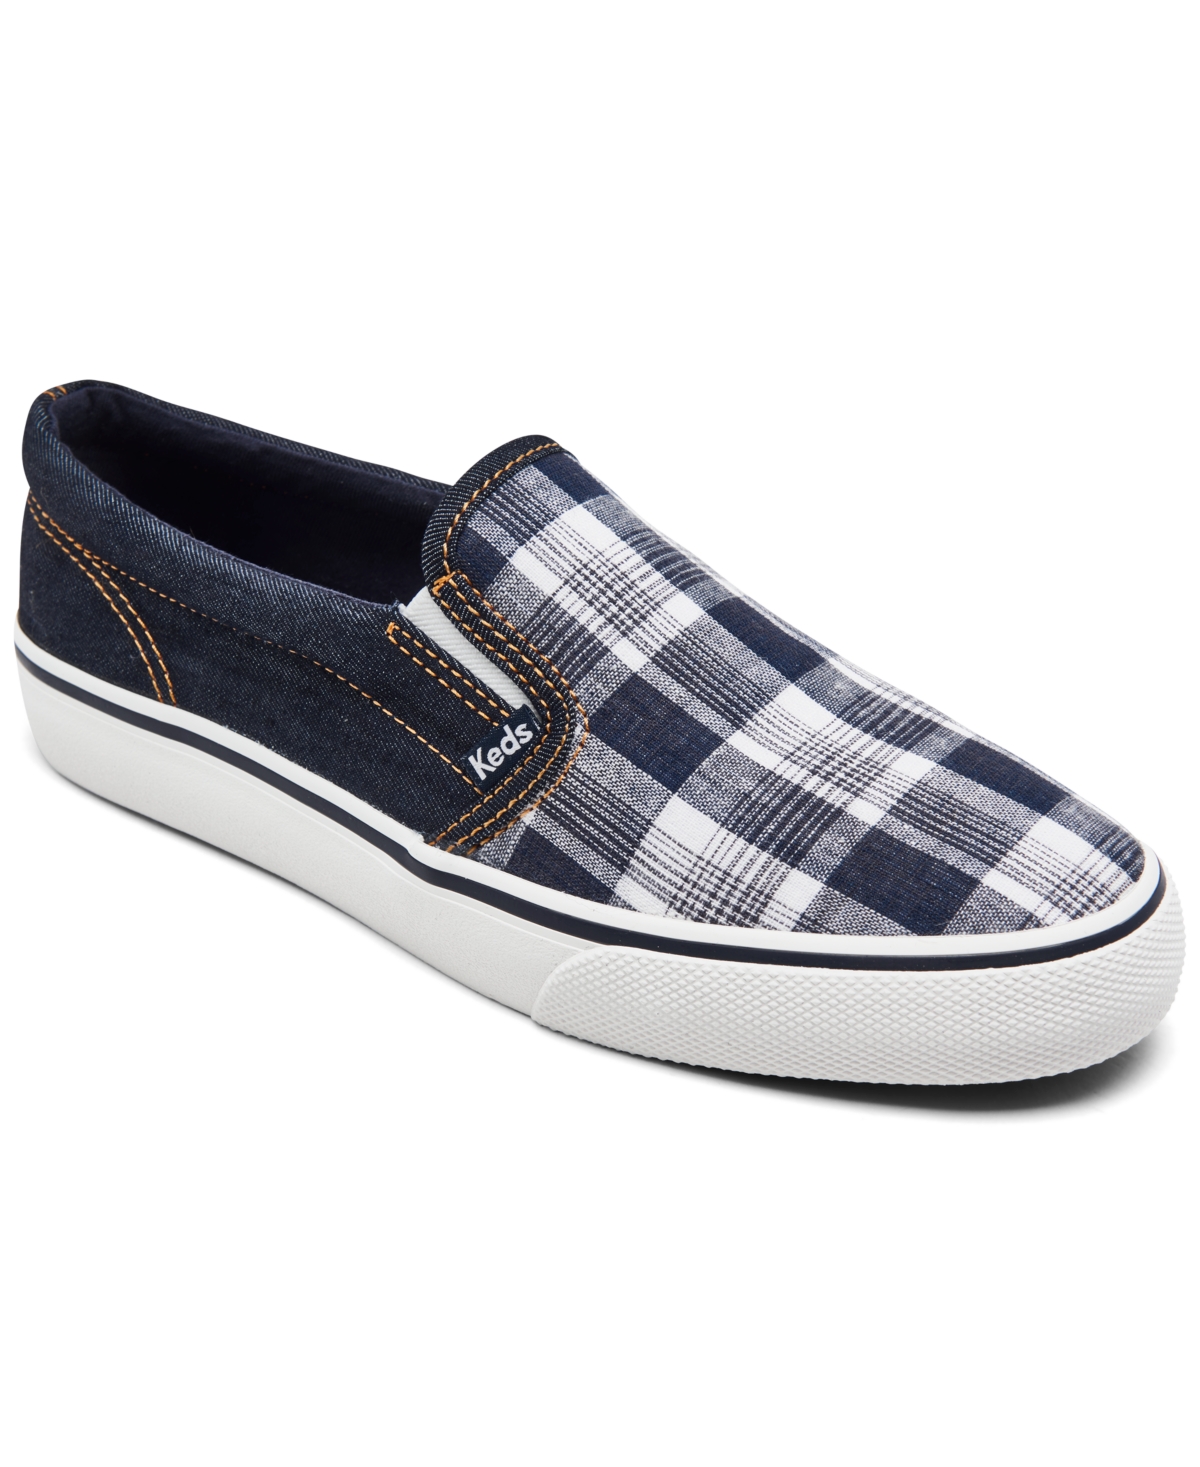 UPC 195018114761 product image for Keds Women's Jump Kick Slip-On Canvas Casual Sneakers from Finish Line | upcitemdb.com